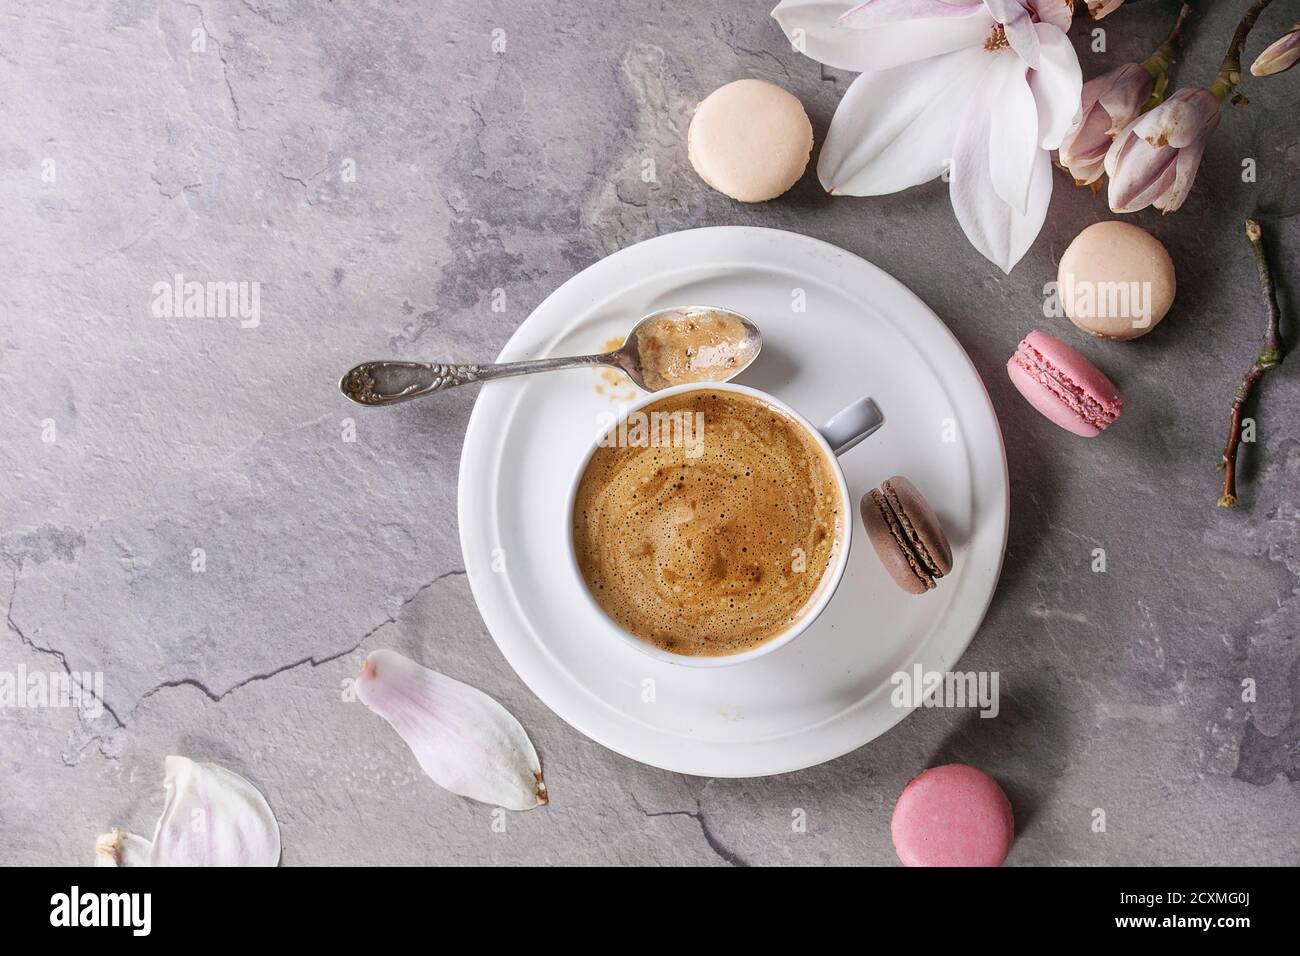 White cup of black coffee, served on white saucer with macaroons biscuits, spoon and magnolia flower blossom branch over gray texture background. Flat Stock Photo